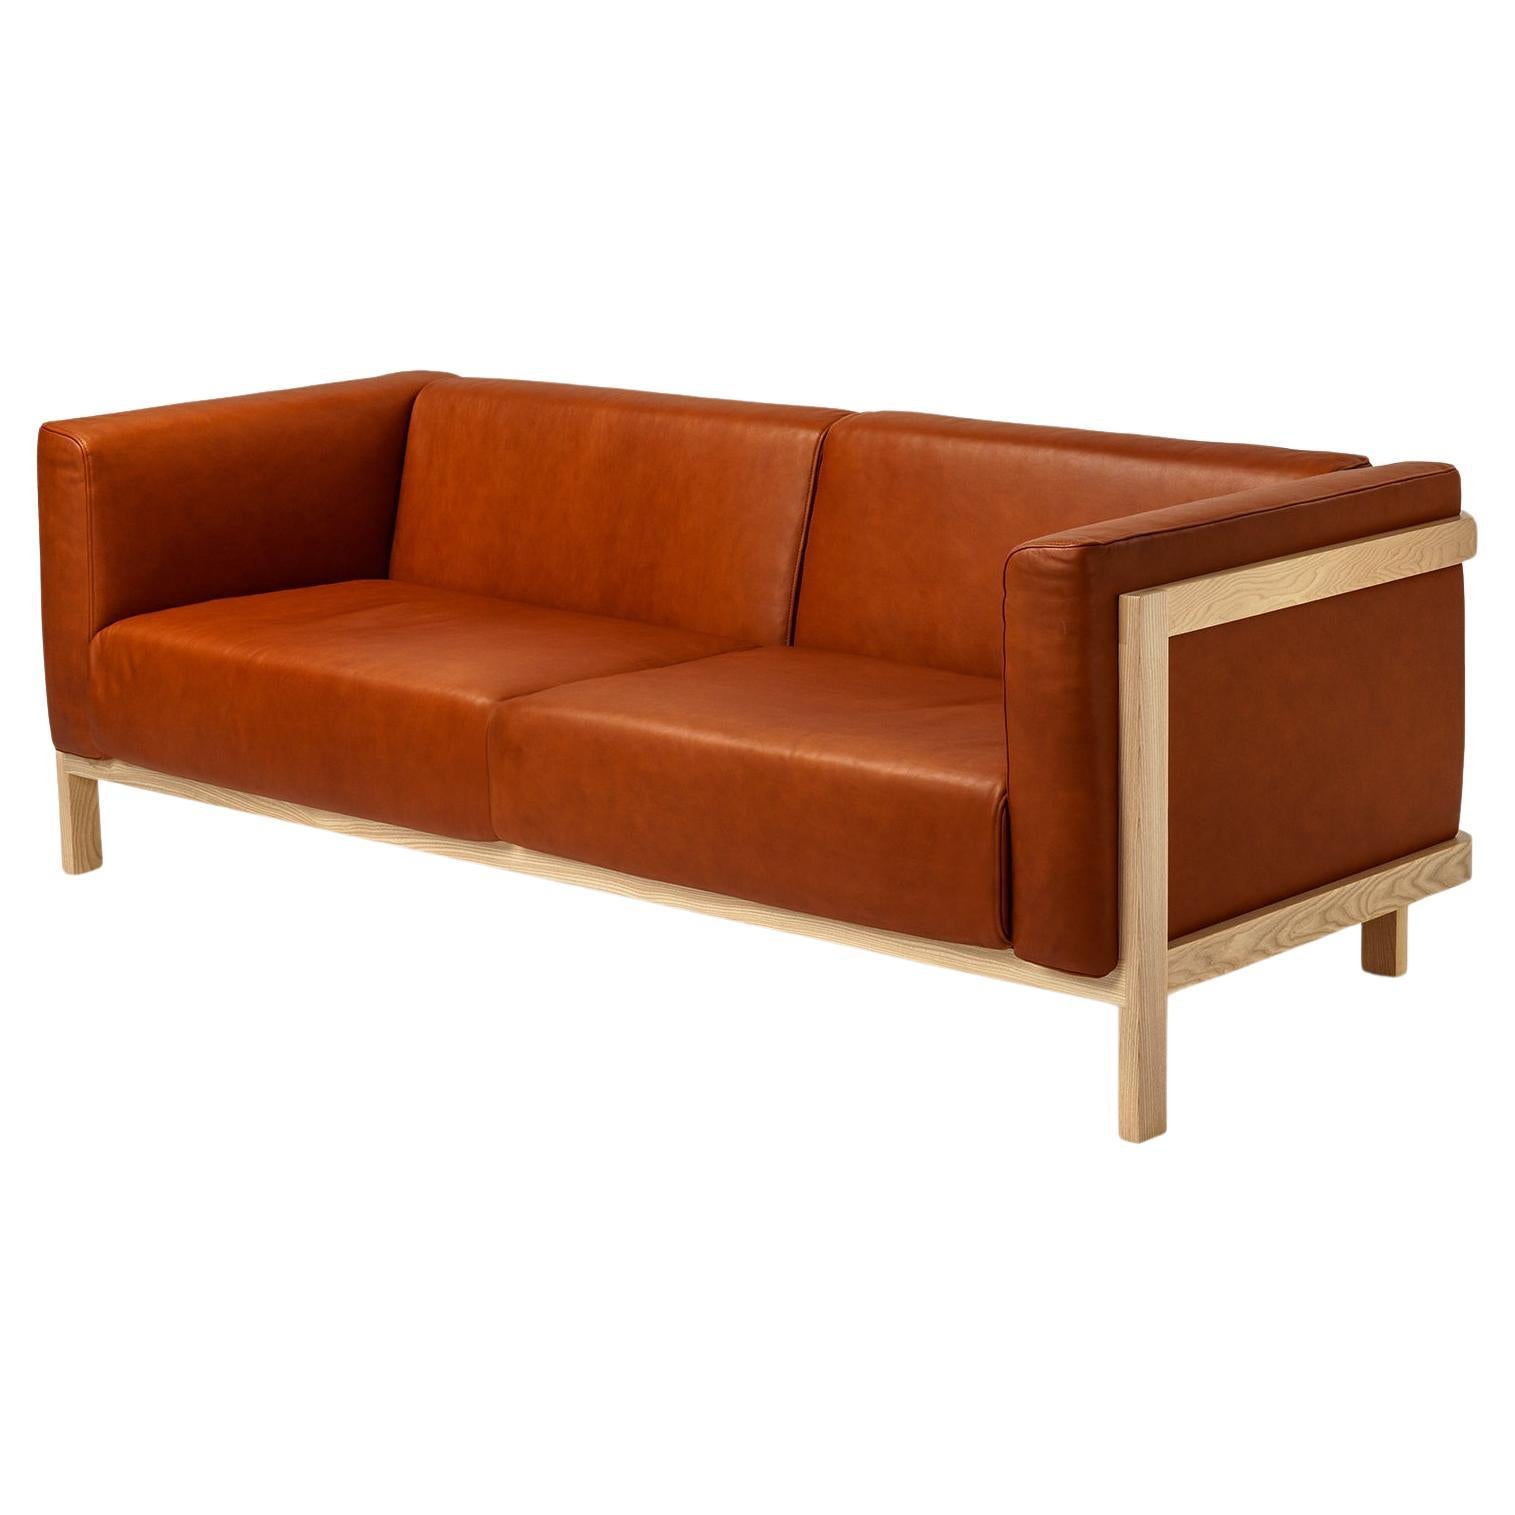 Minimalist three seater sofa ash - leather upholstered For Sale